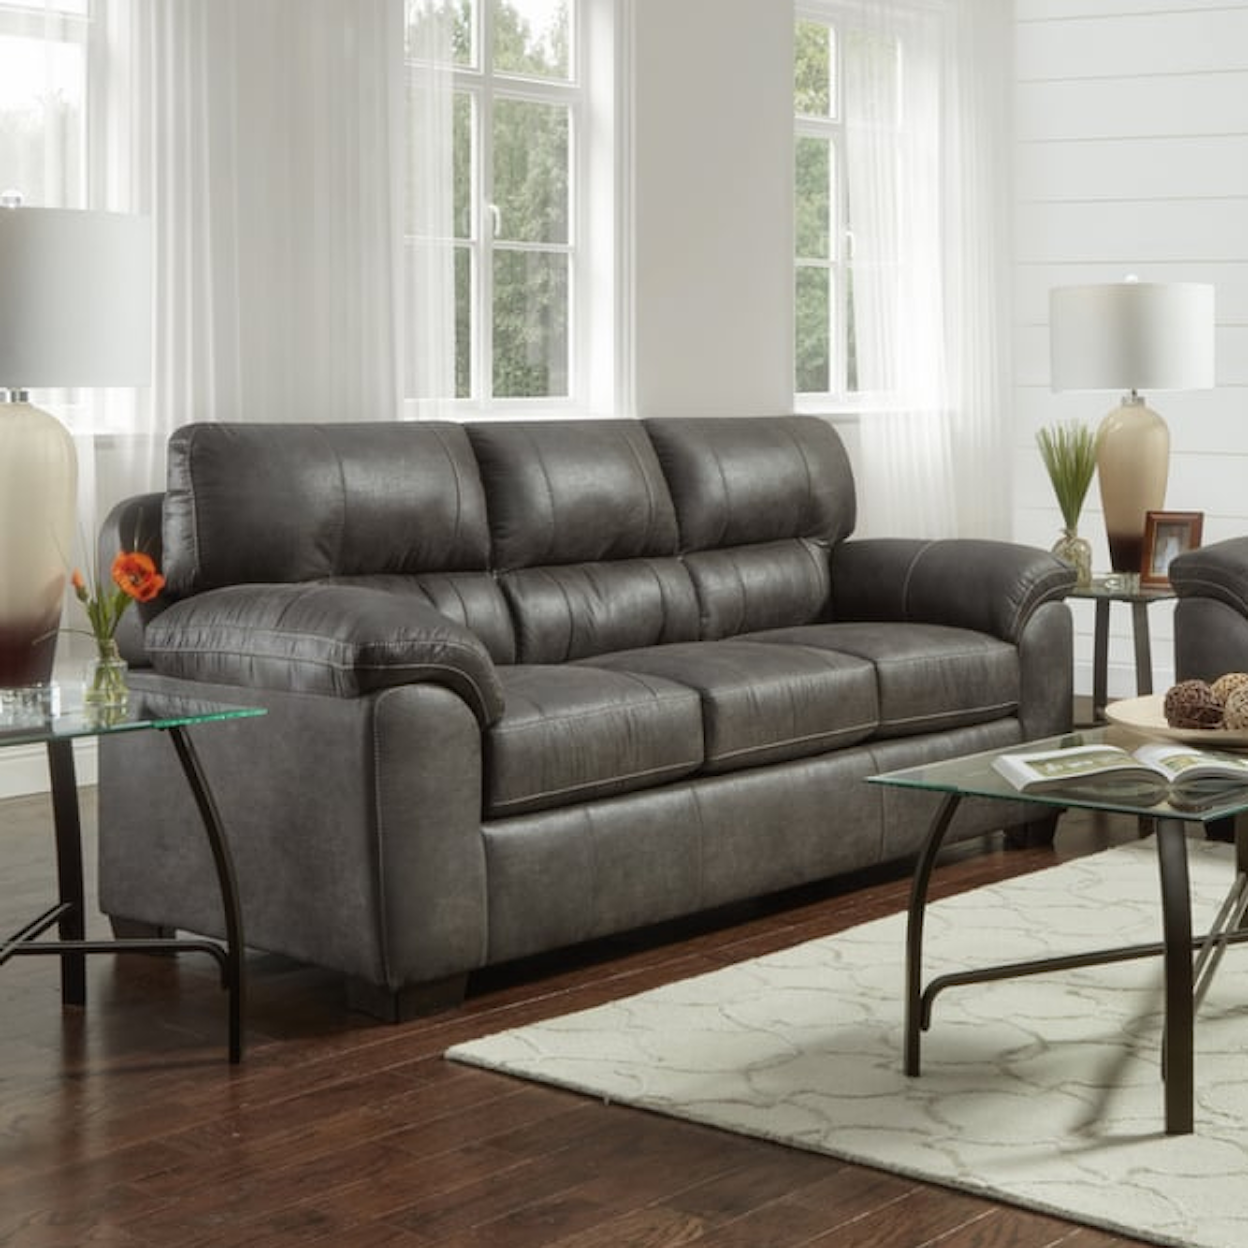 Affordable Furniture Sycamore SYCAMORE SOFA |